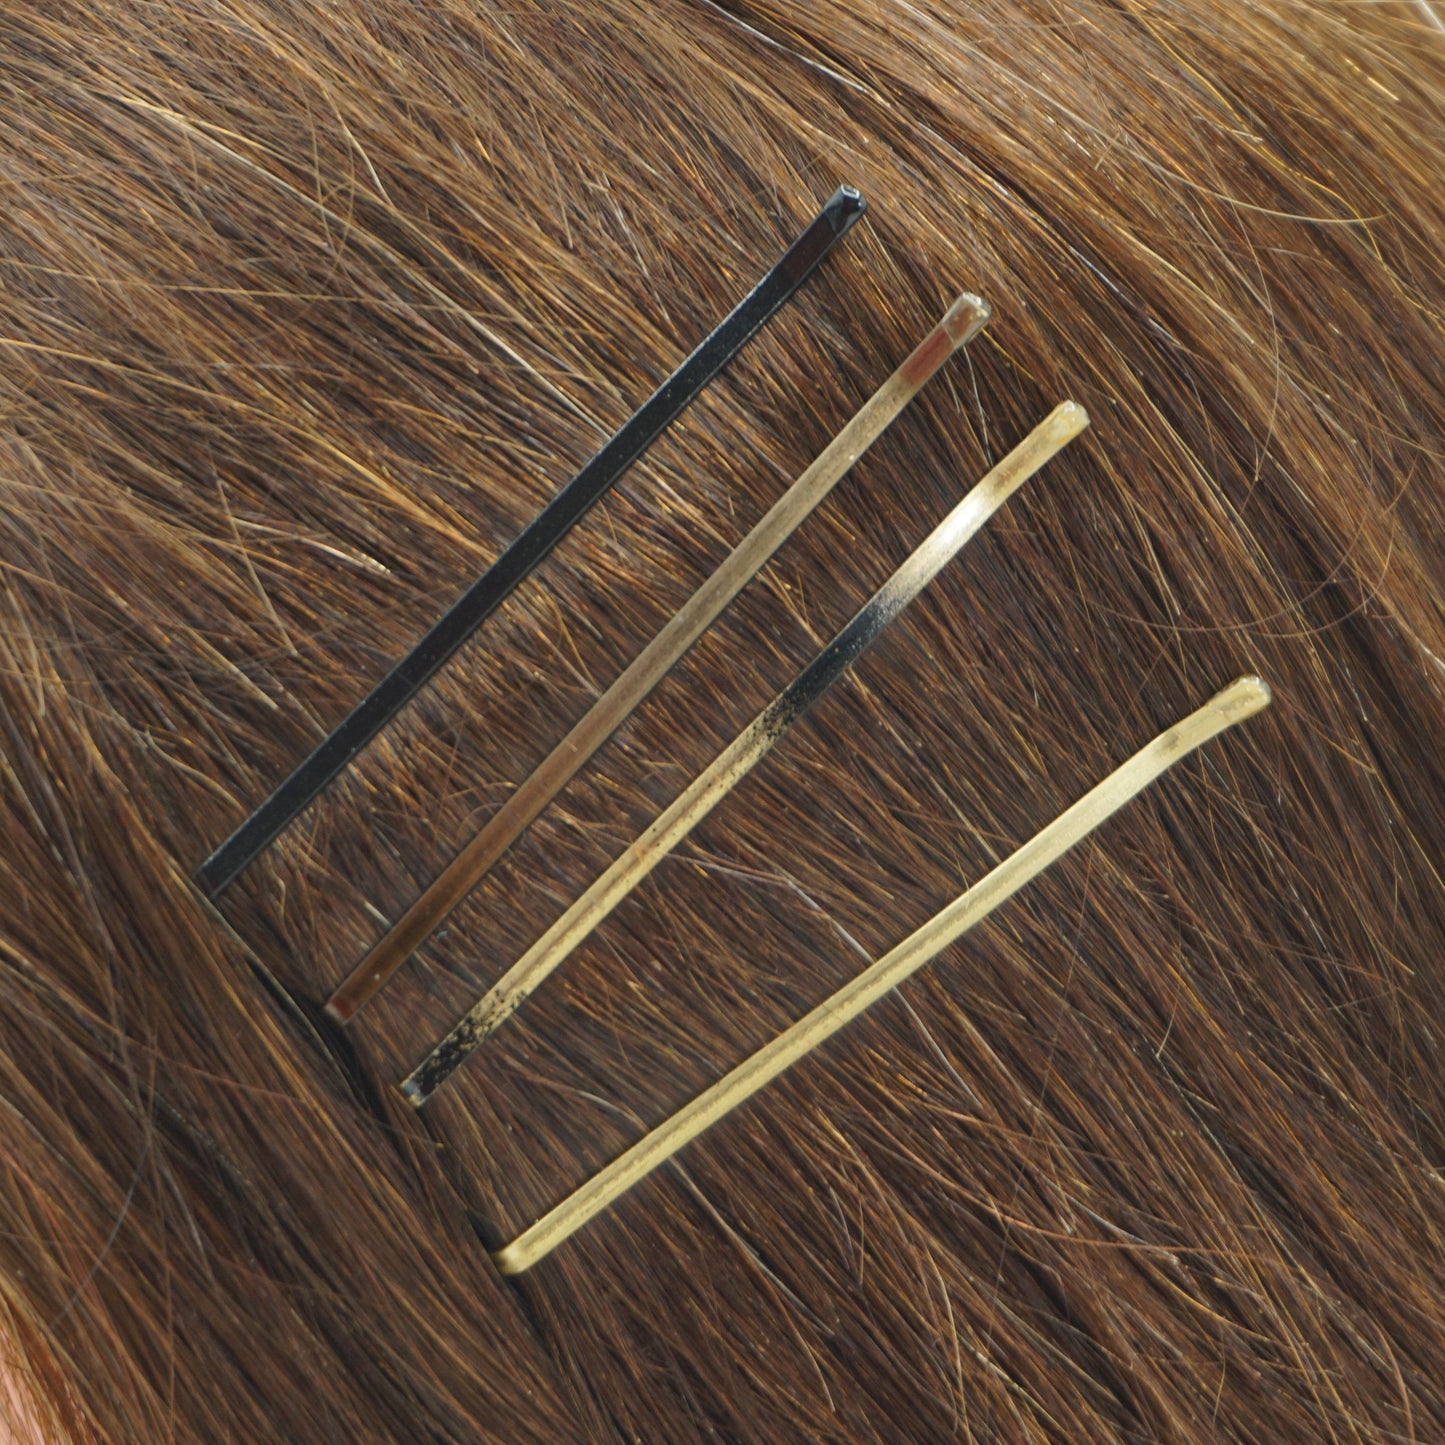 180, Brown, 2.8in (7.0cm), Italian Made Flat Jumbo Bobby Pins, Recloseable Stay Clean and Organized Container